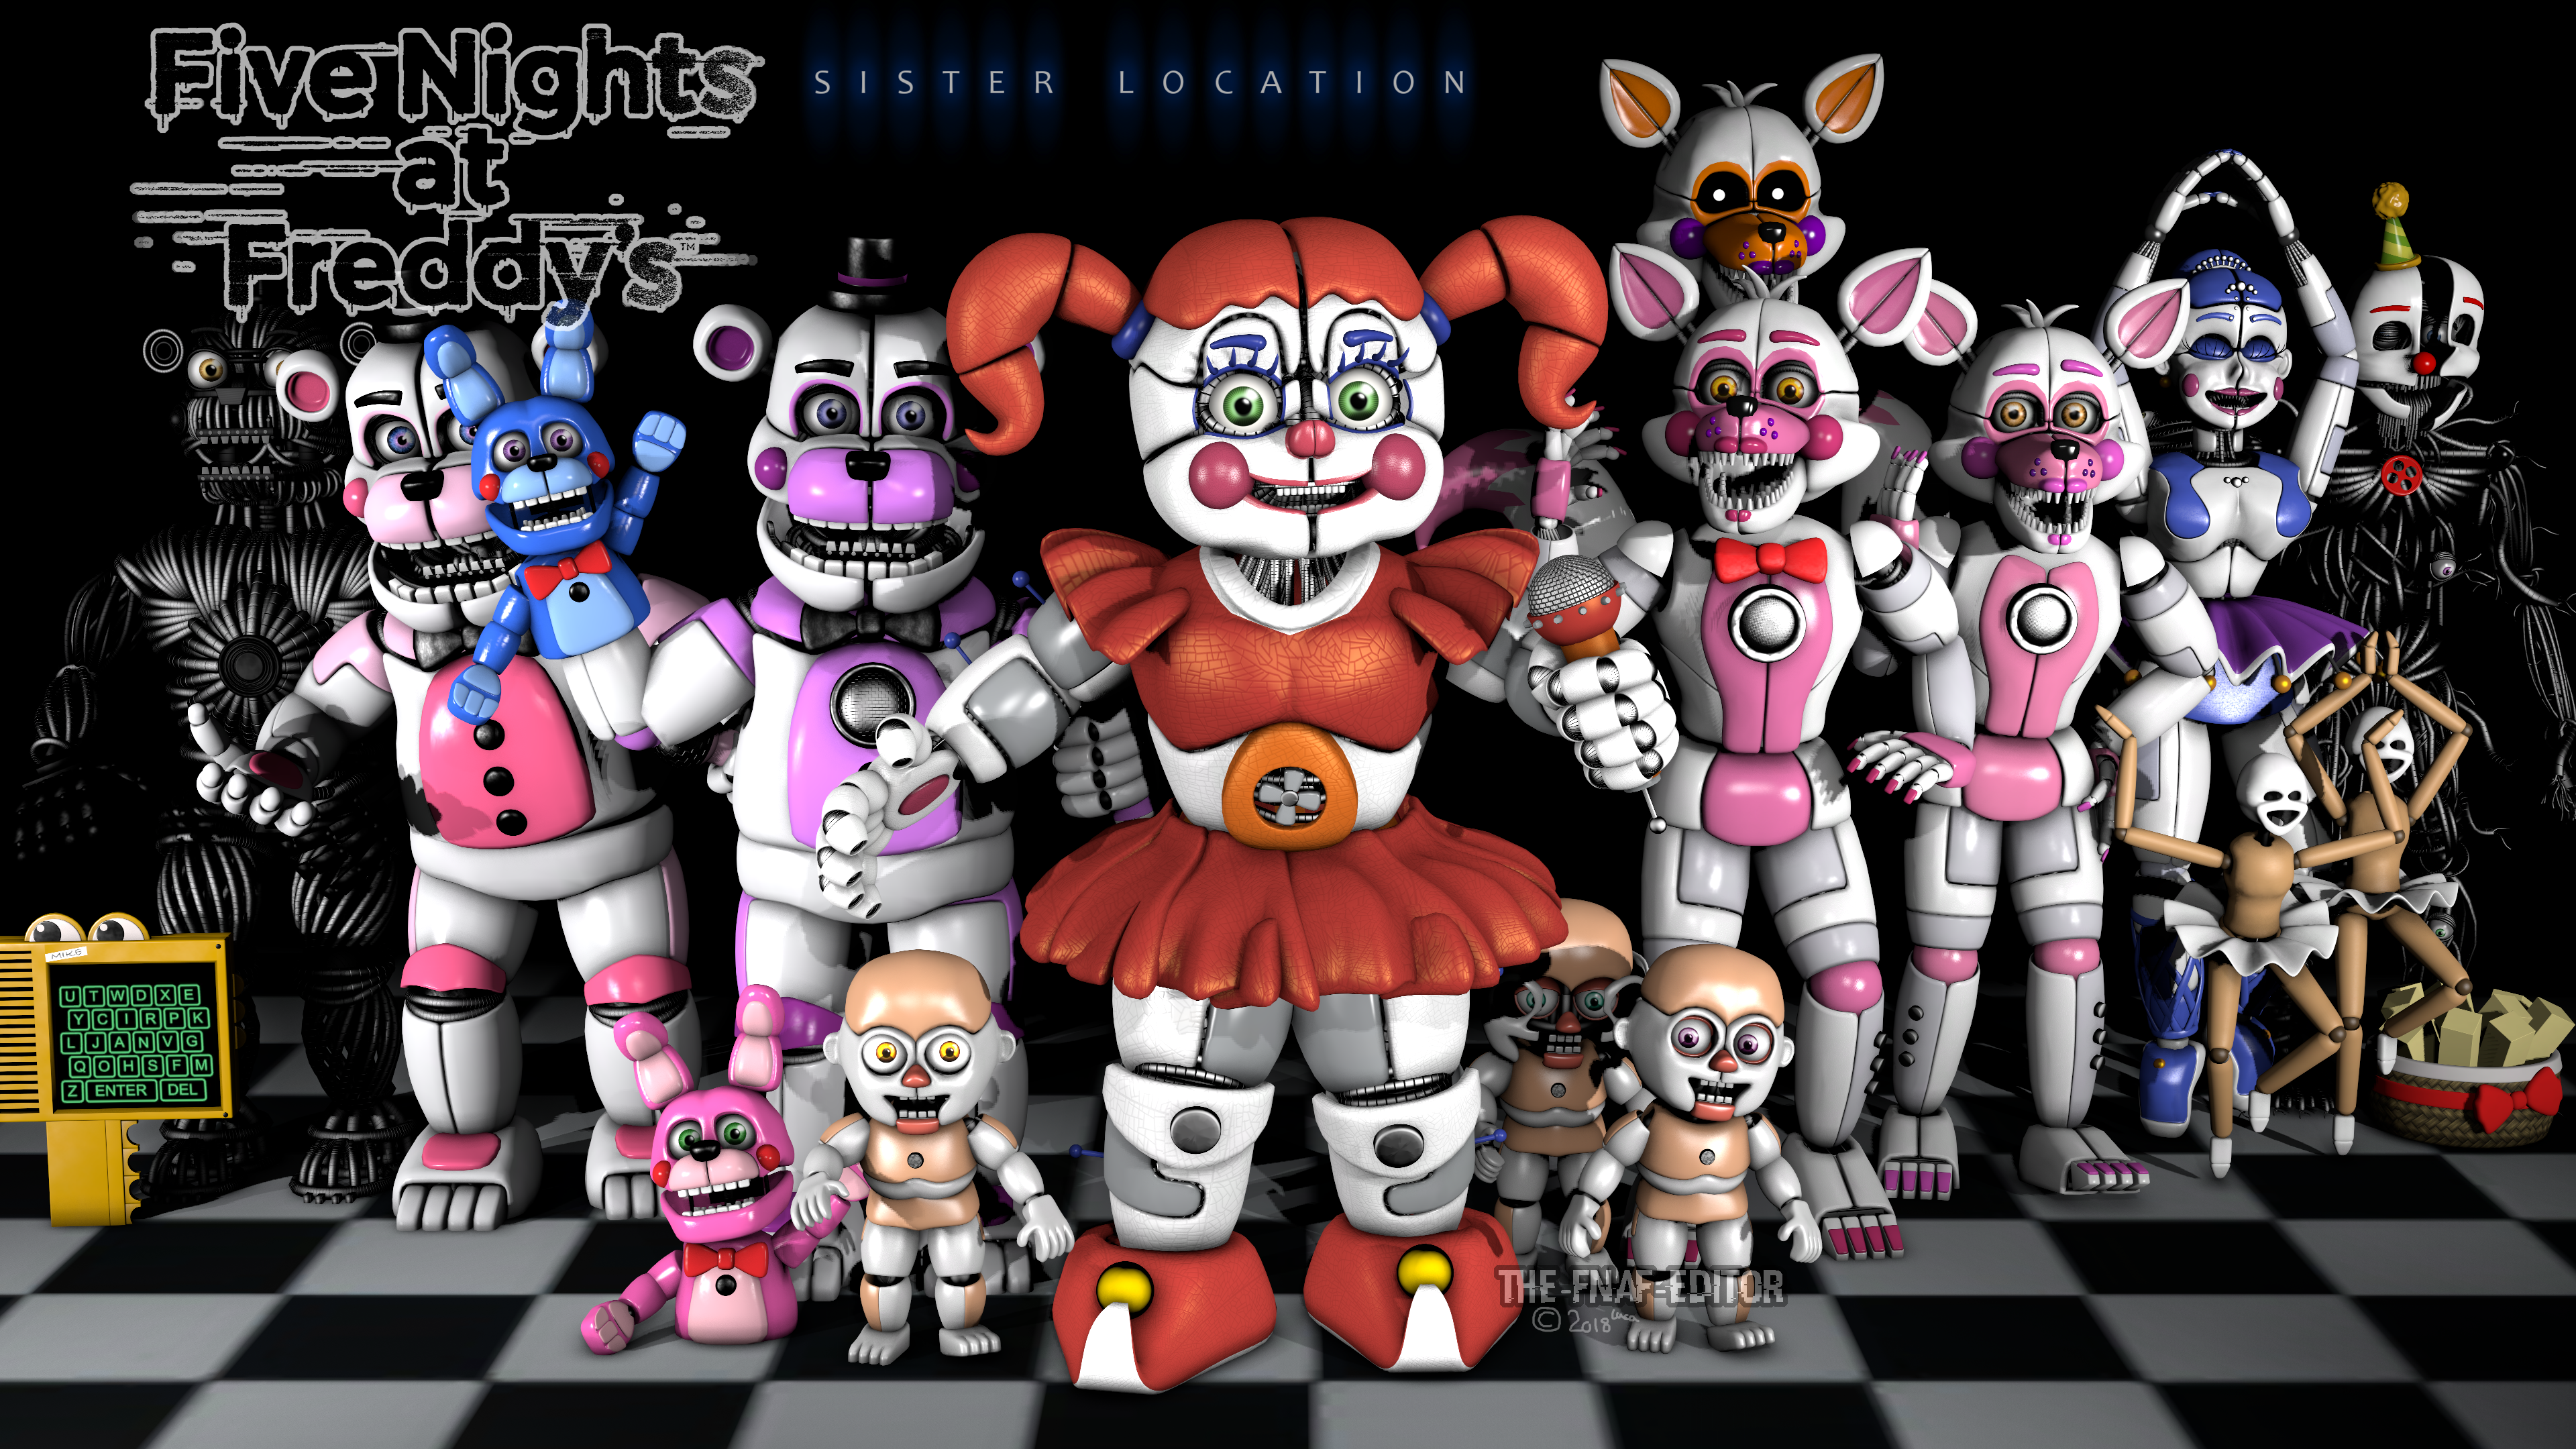 General 3840x2160 Five Nights at Freddy's Scott Cawthon Sister location video games PC gaming 2018 (year)